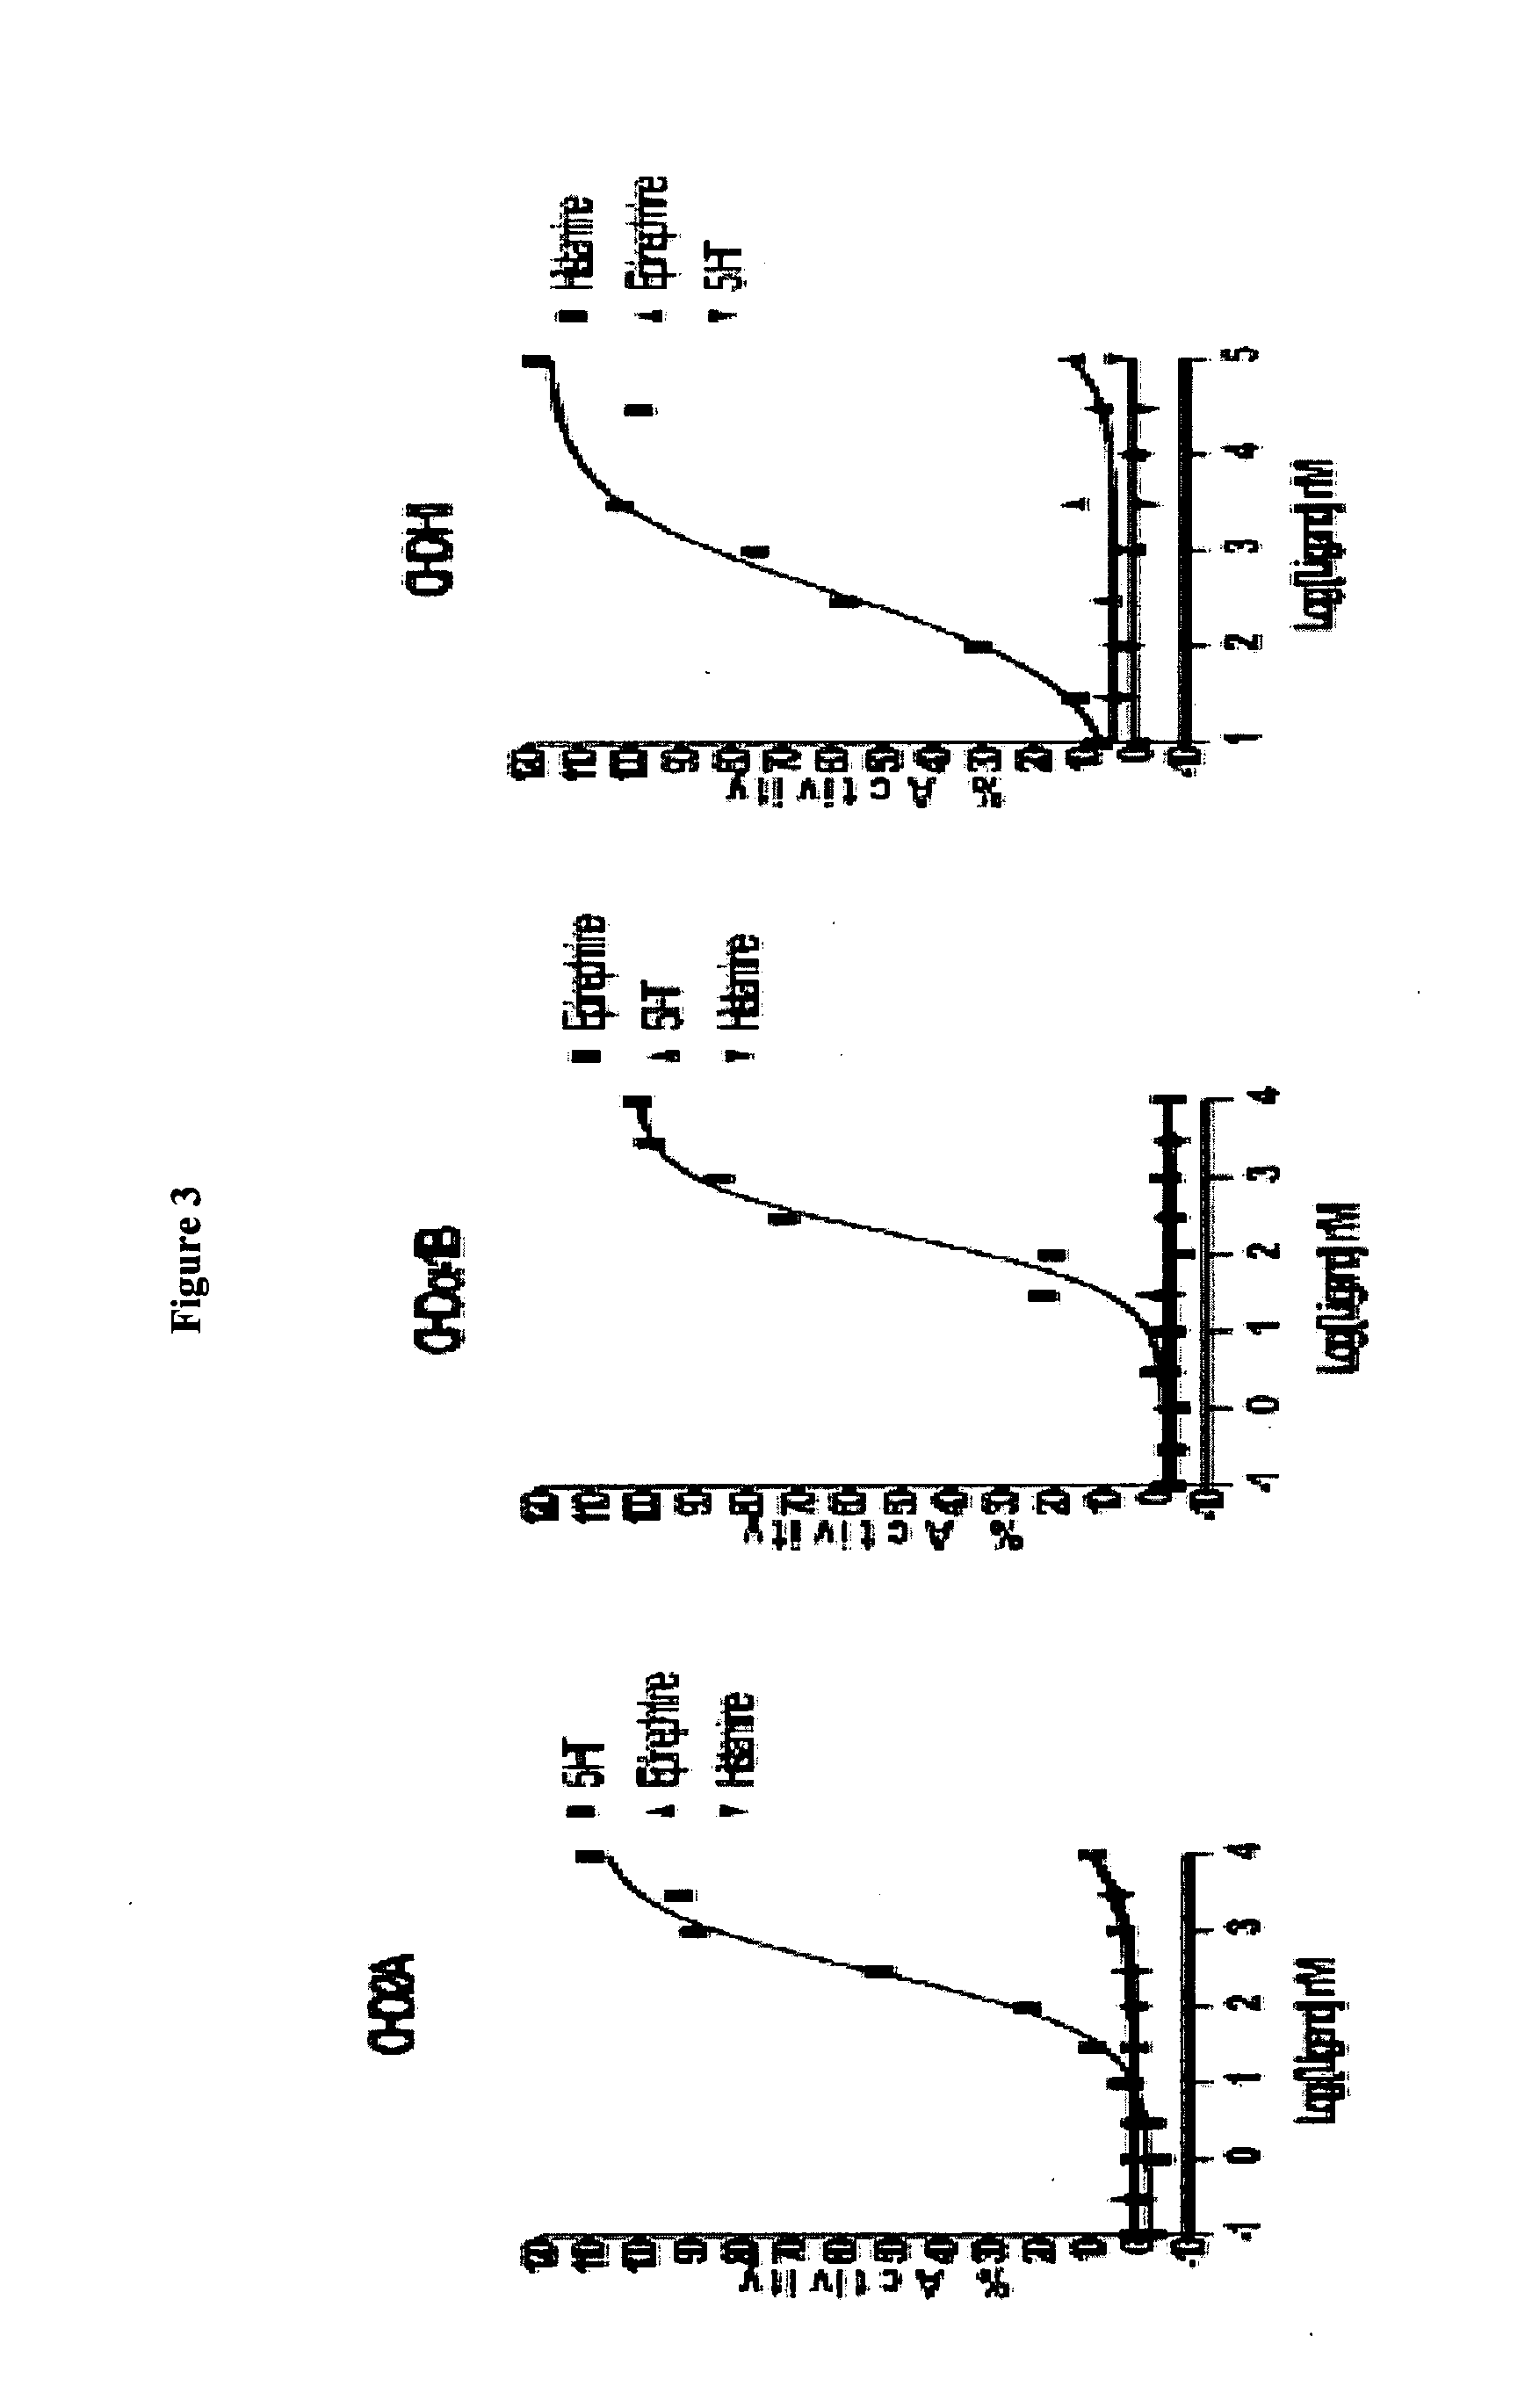 Functional assay for 5-ht2a, histamine h1 or adrenergic alpha 1b receptors